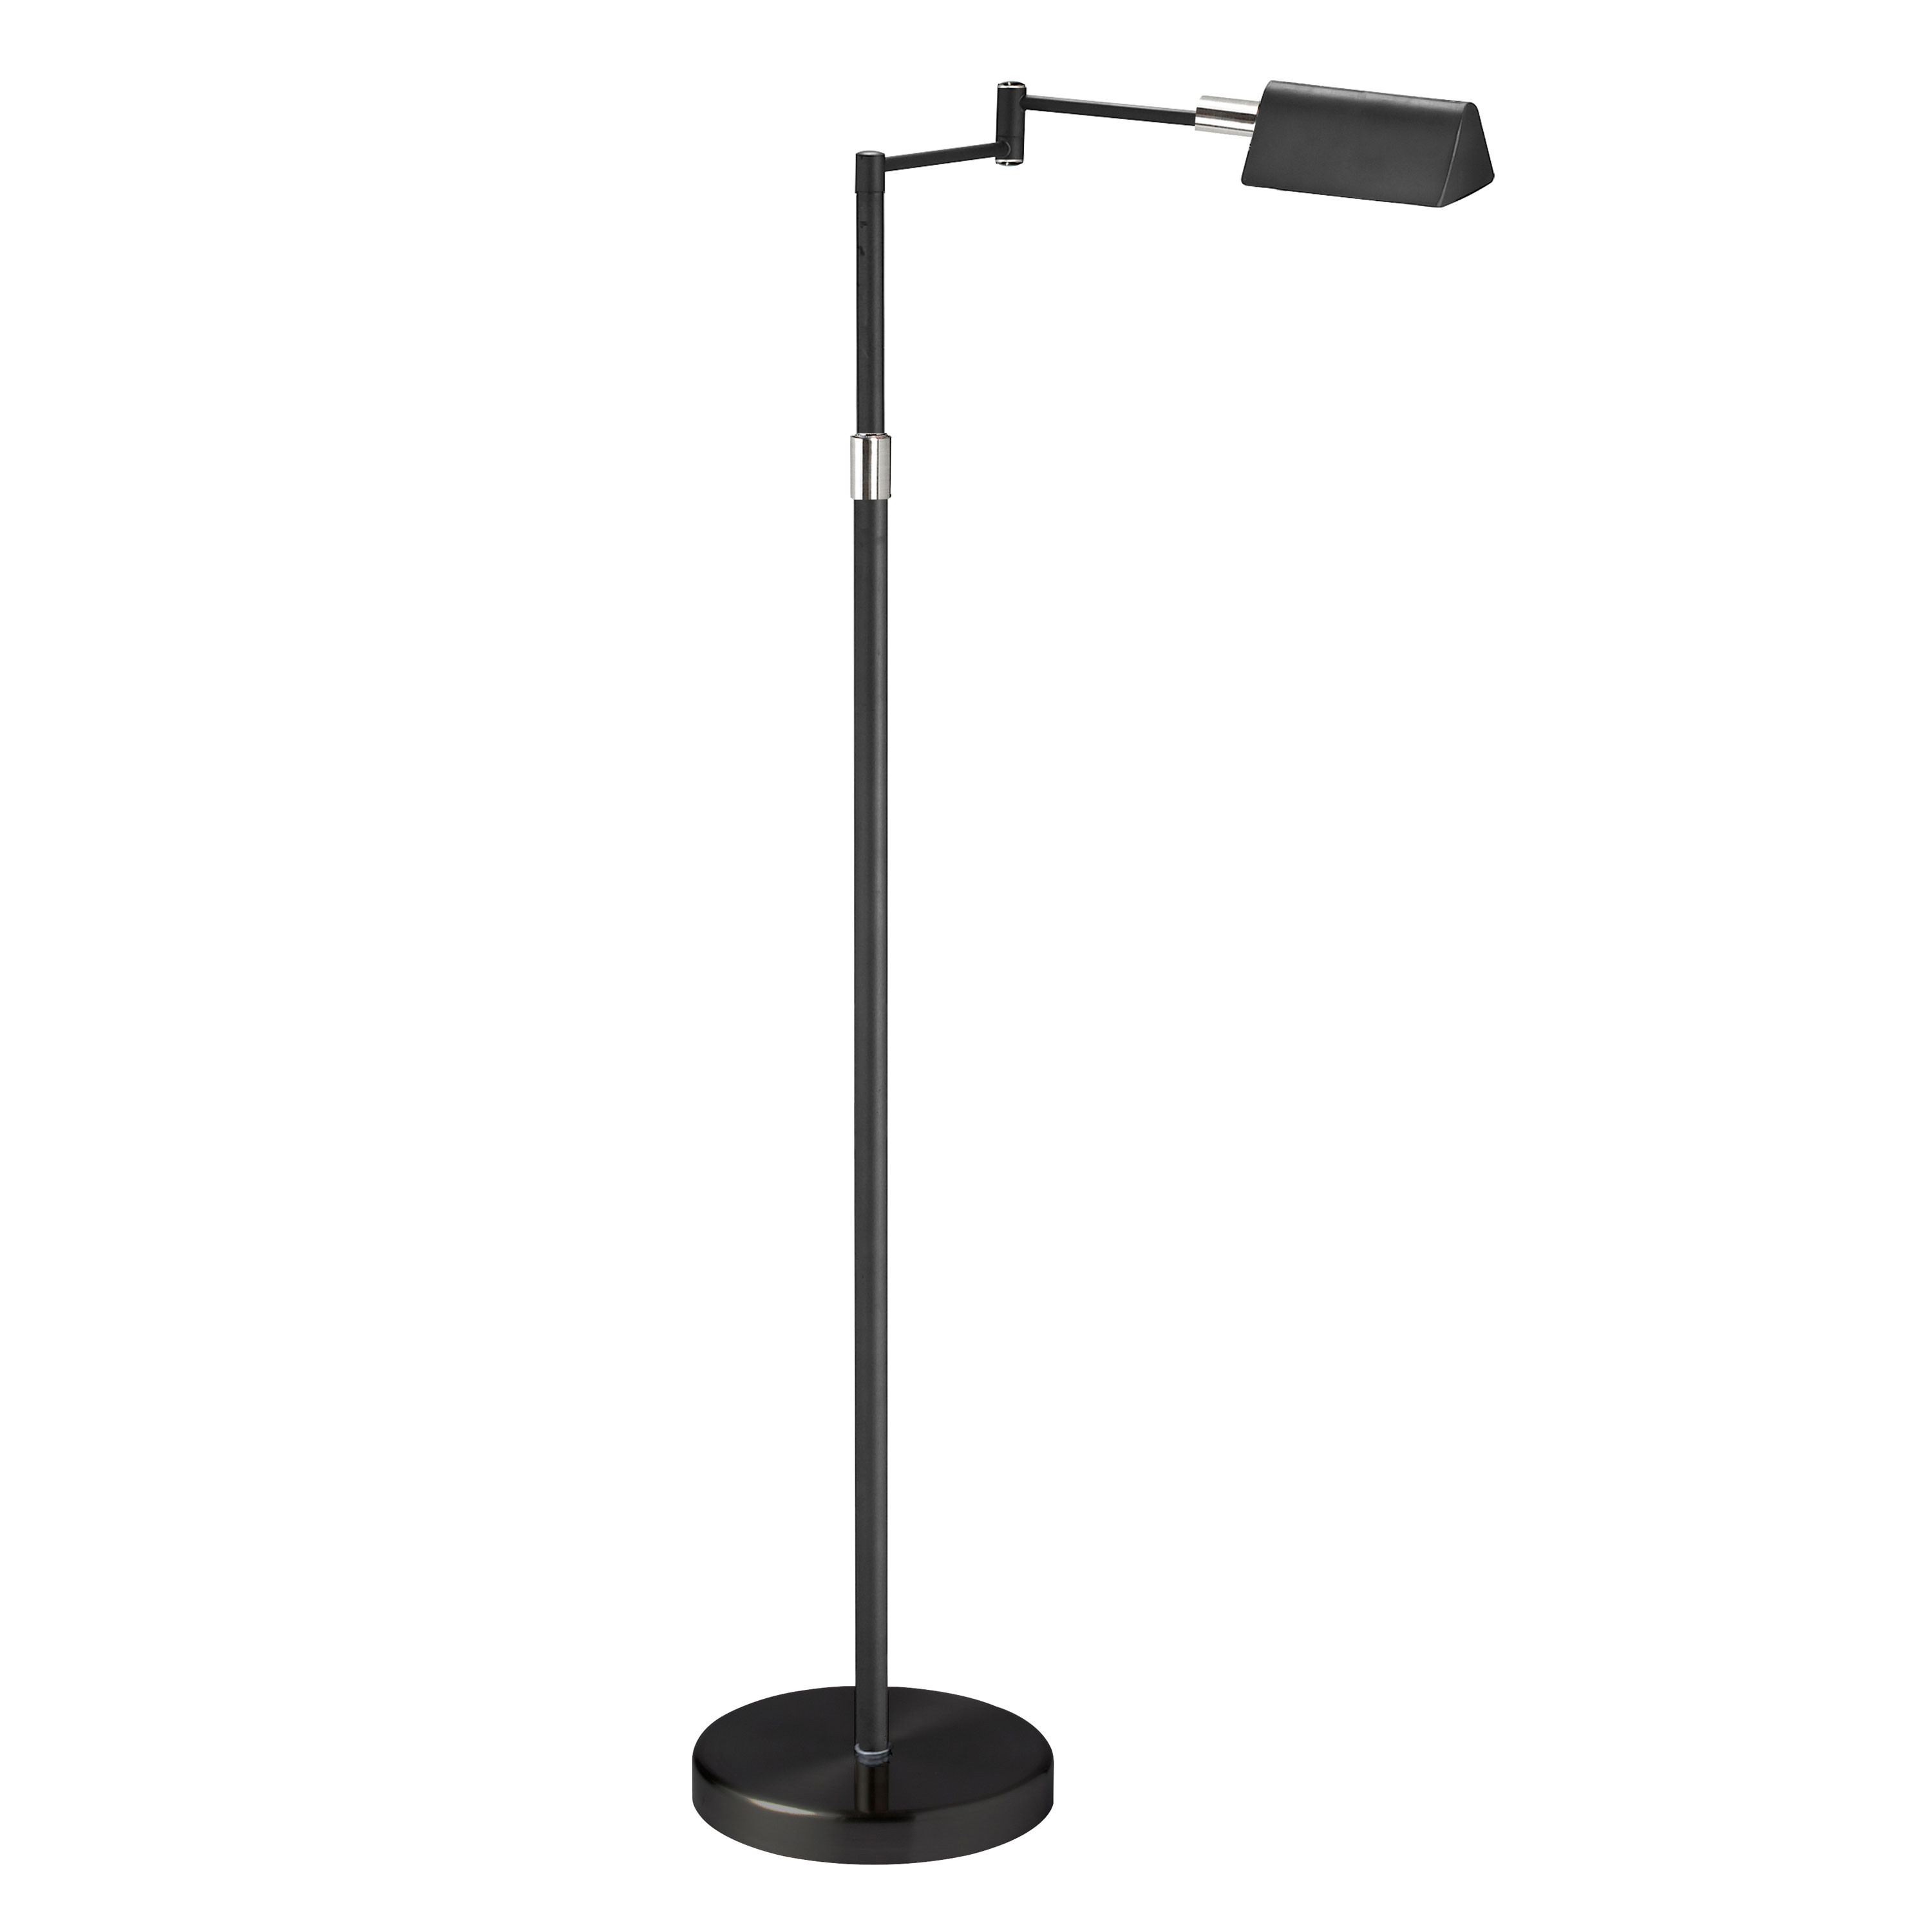 With clean lines and a stylish profile, the Adjustable LED family of portable lighting will easily adapt to your modern or minimalist décor. The design features an integrated LED light. LED fixtures produce light at up to 90 percent better efficiency than incandescent lighting.  The sleek metal frame comes in your choice of finish, and in a range of configurations to suit the needs of your space. It's an attention getting design with a very practical application. Adjustable LED lighting, with its convenient and versatile range of formats, will add both style and directional illumination to living rooms, bedrooms and office spaces.